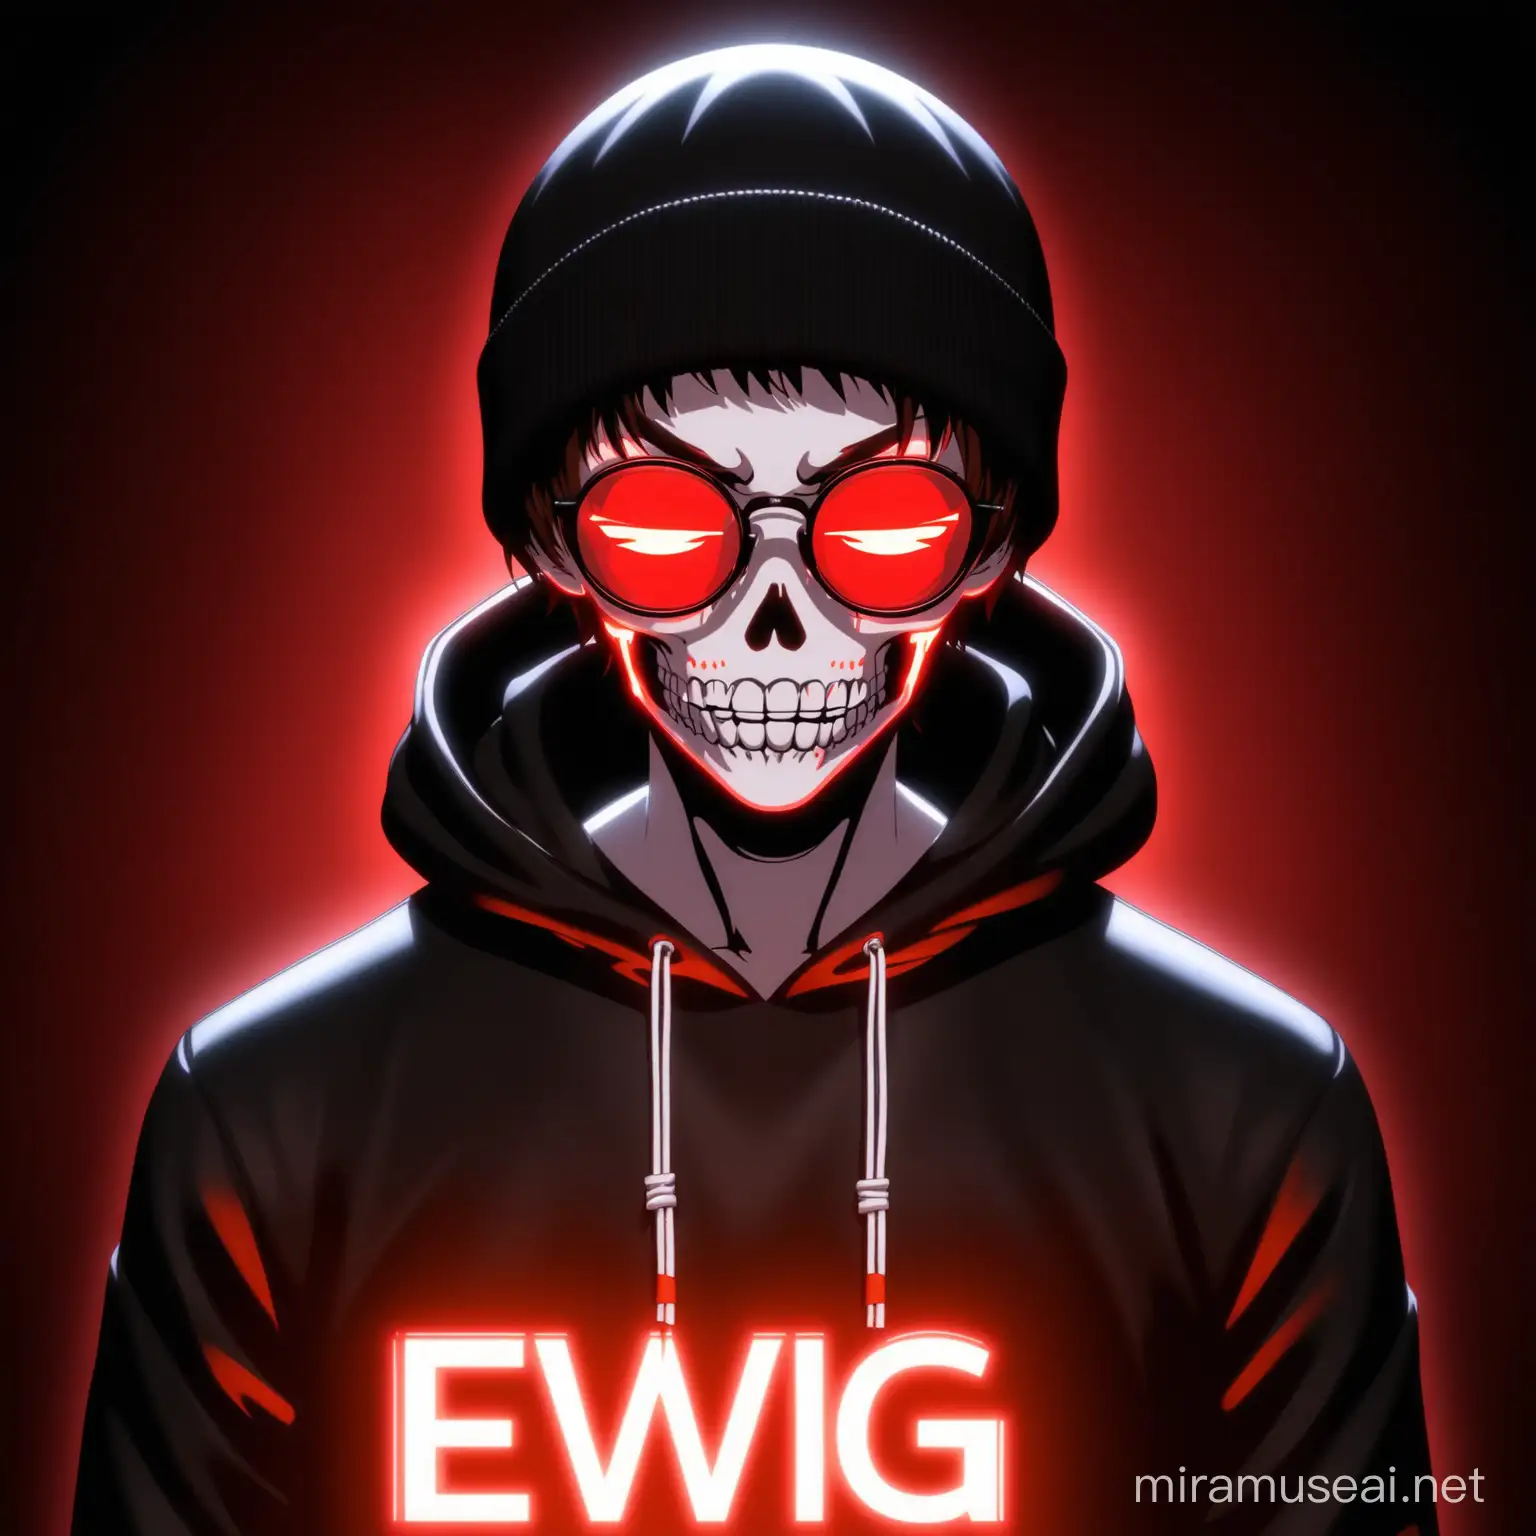 Anime Brown Boy with Skeleton Face Paint and Red Glowing Eyes in 3D Anime Style